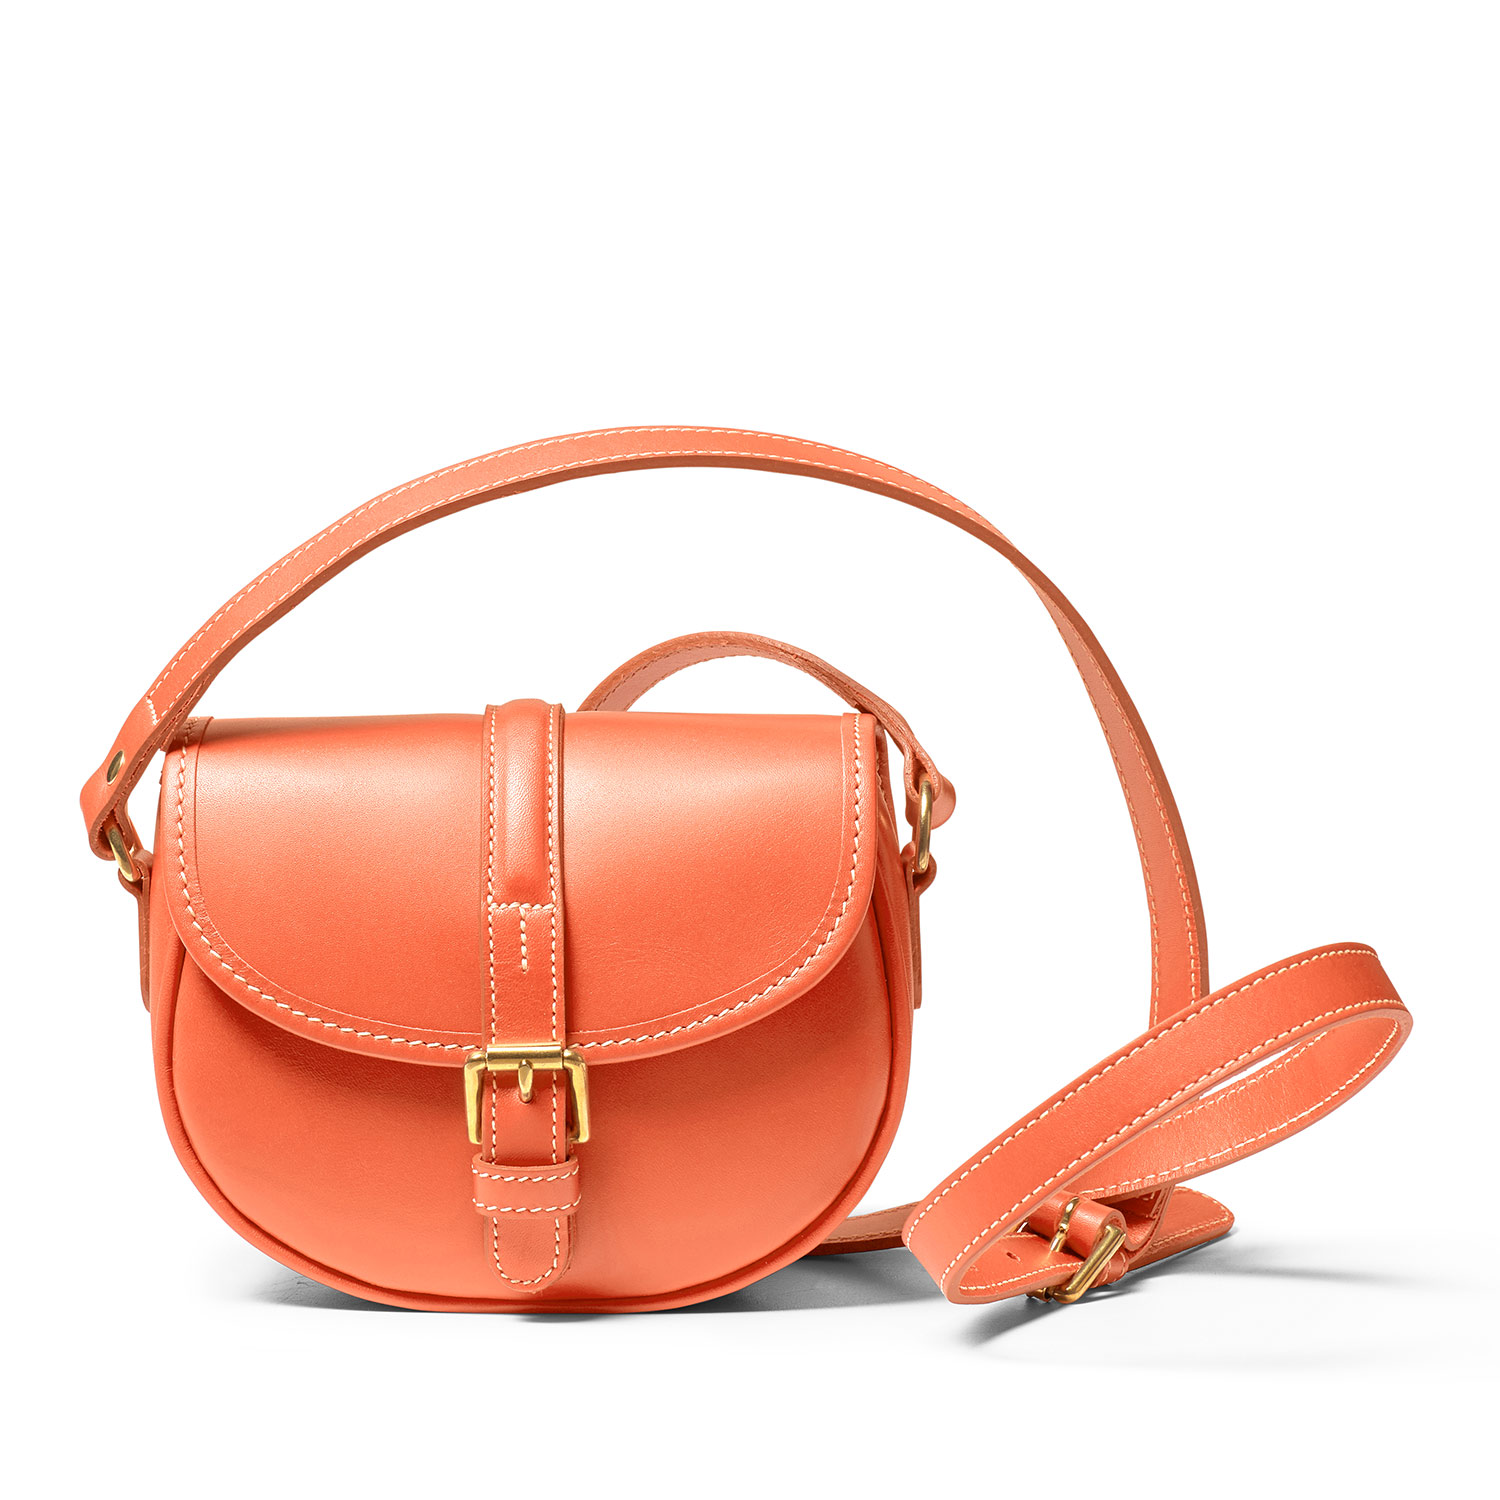 Cardington Mini Leather Crossbody bag | Made in England by Tusting